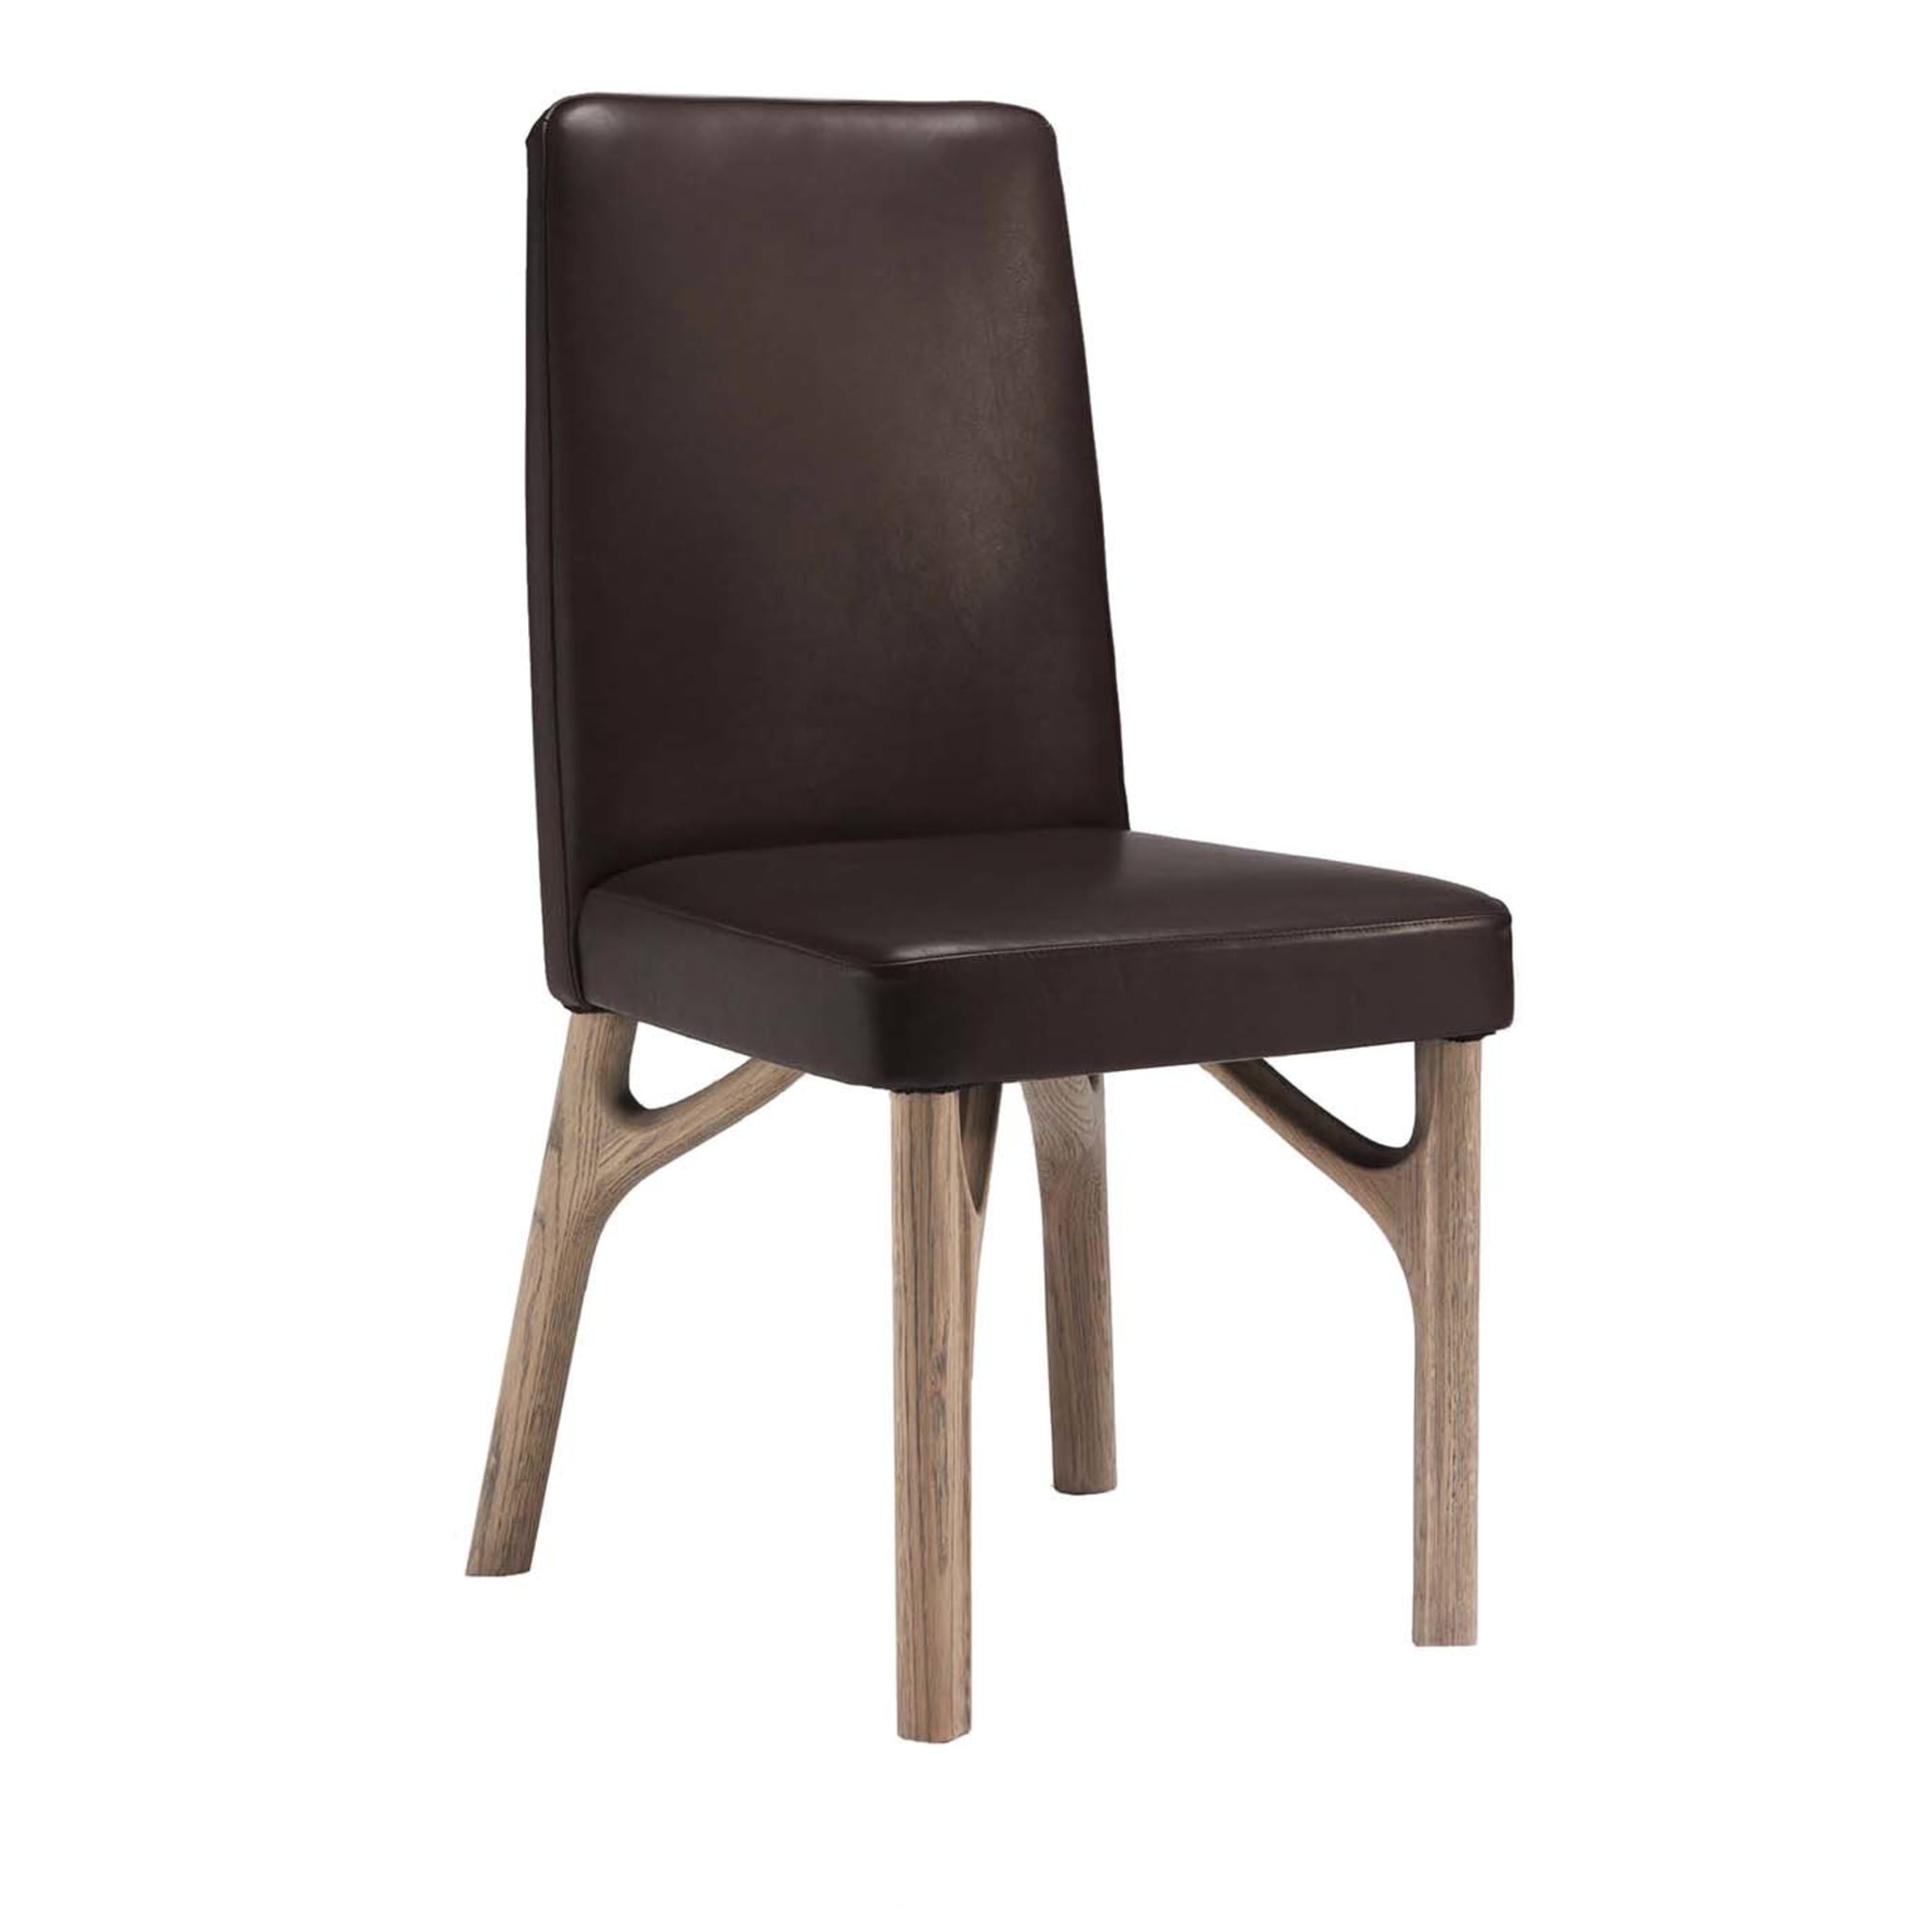 Arpeggio Chair by Giopato & Coombes - Main view